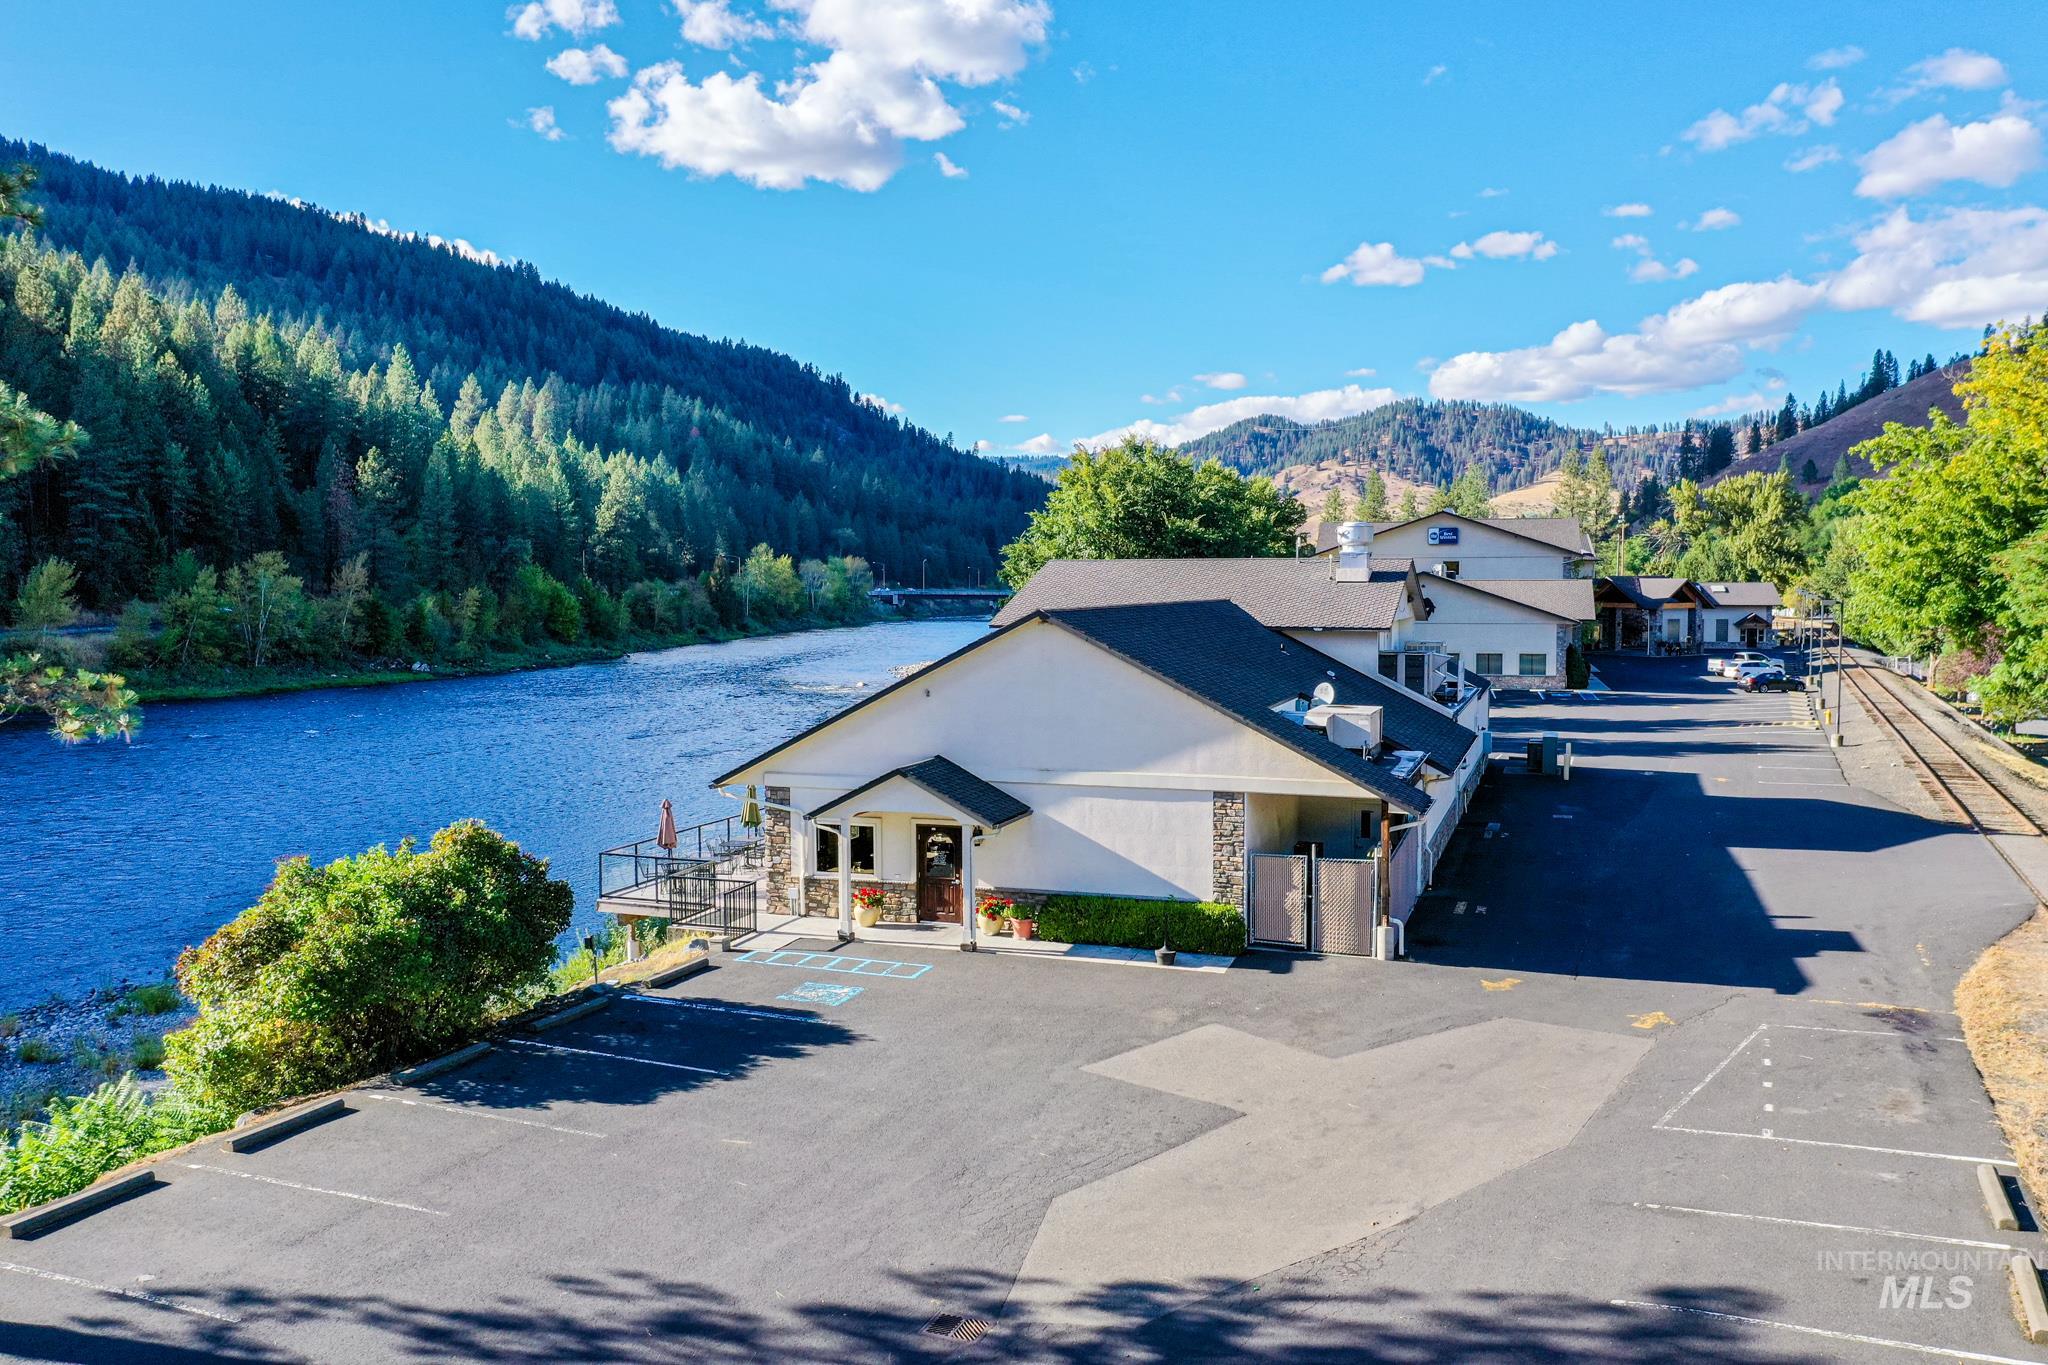 625 Main St, Orofino, Idaho 83544, Business/Commercial For Sale, Price $900,000,MLS 98784073